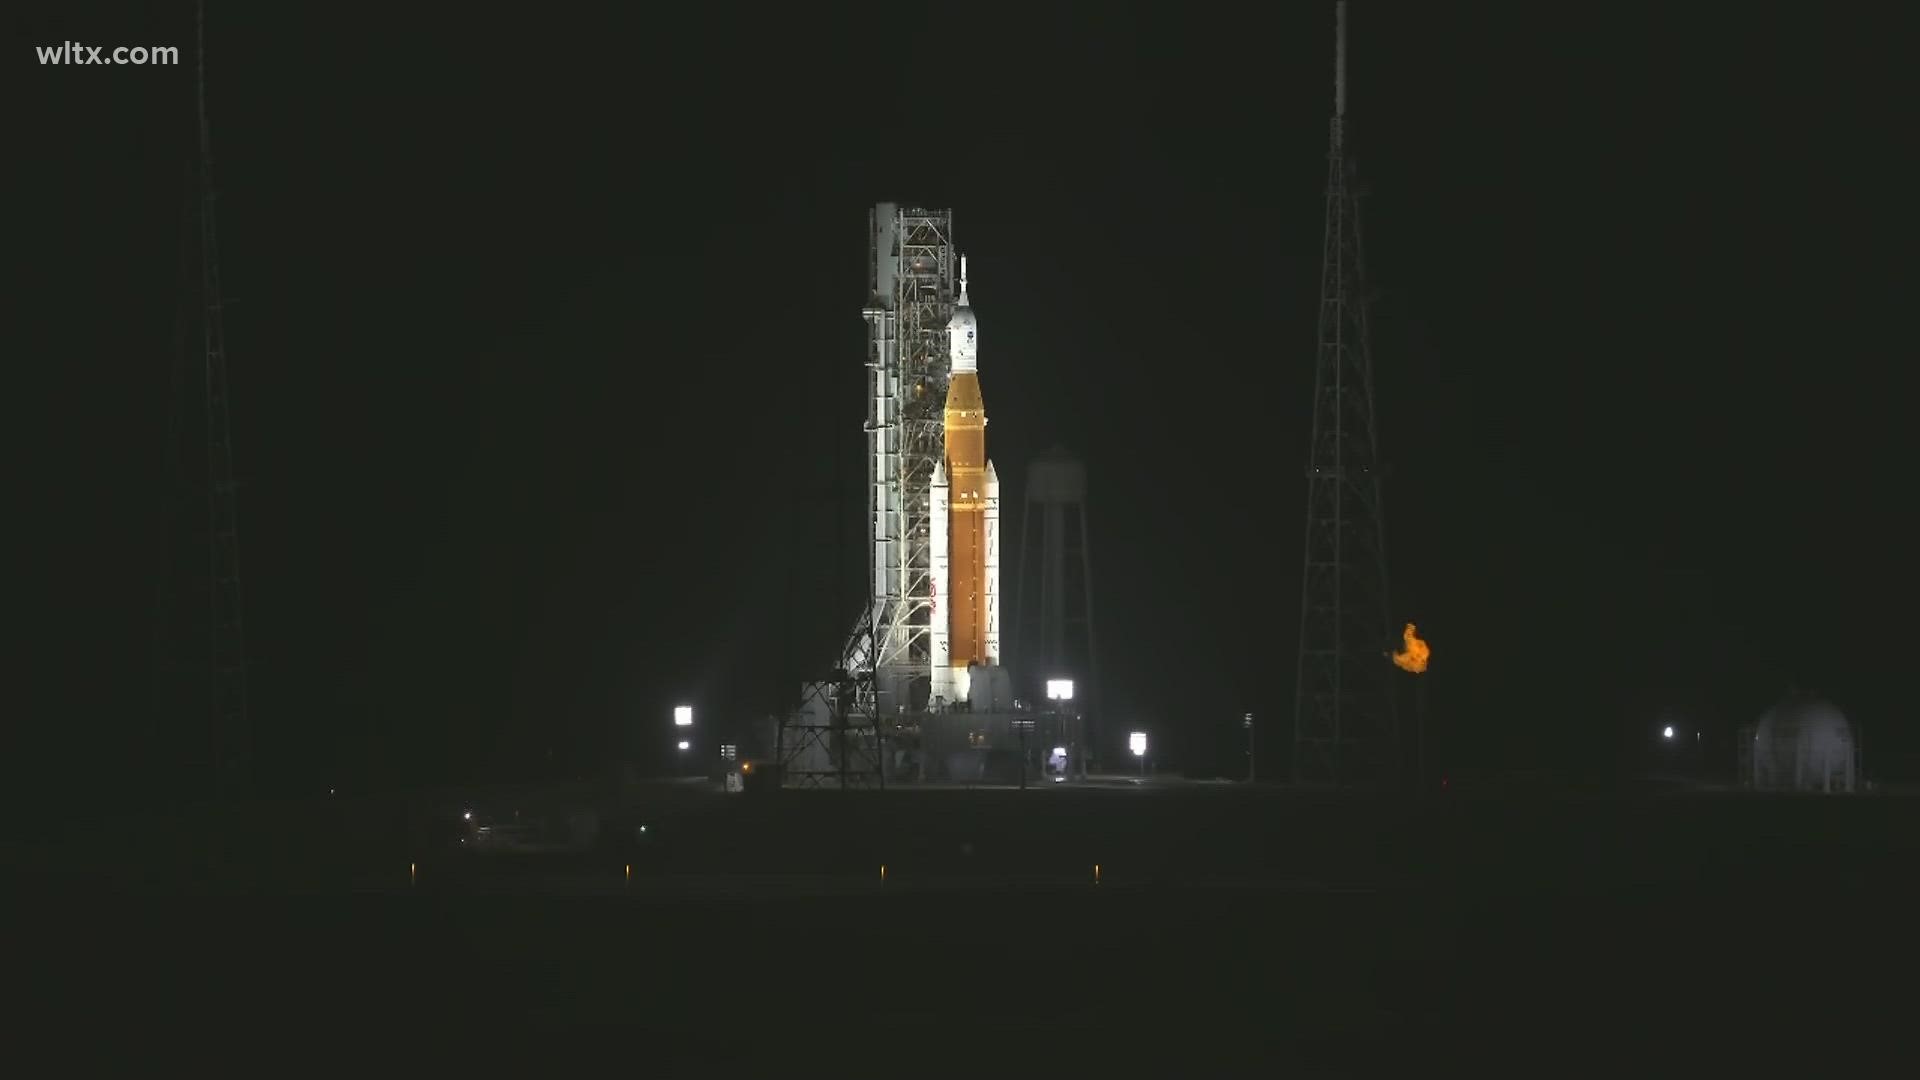 Liftoff is scheduled for the early morning hours of Wednesday from NASA's Kennedy Space Center, with test dummies rather than astronauts on board.